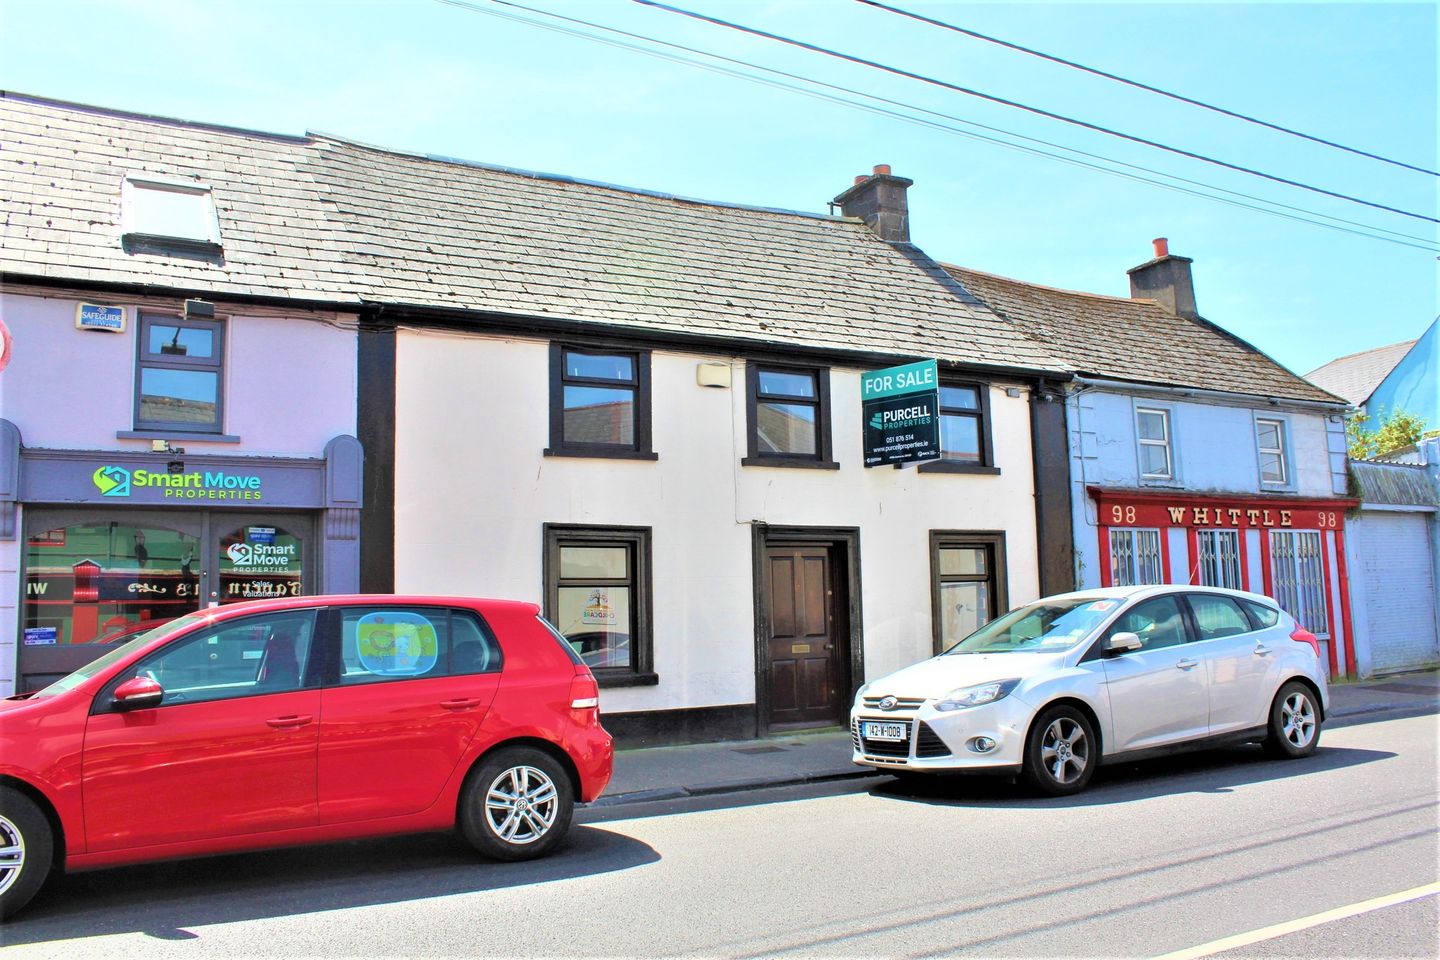 99 Lower Yellow Road, Waterford City, Co. Waterford